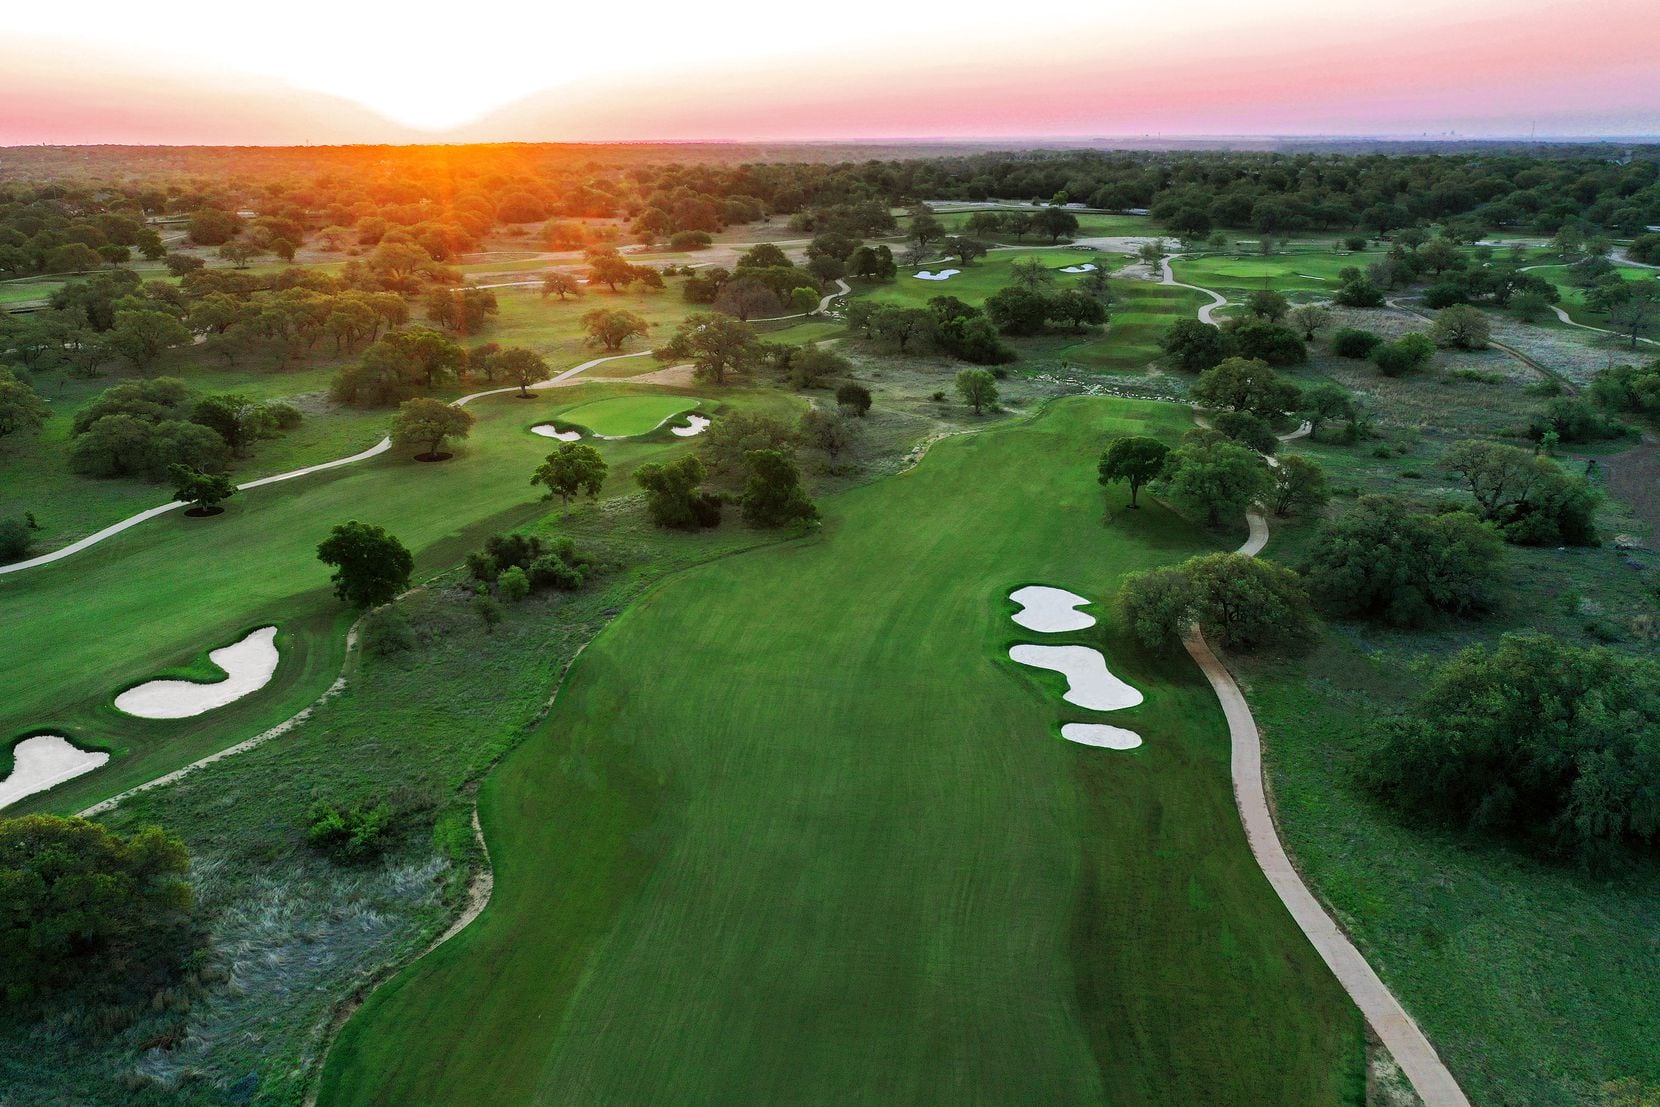 As the sun rises over Driftwood Golf and Ranch Club, several holes on the grassed-in front nine are visible. The holes primarily pictured are Holes 4 & 5 fairway (5 fairway and green on the left, No. 4 fairway and tees on the right). Holes 3 & 6 can be seen at the top of the image.